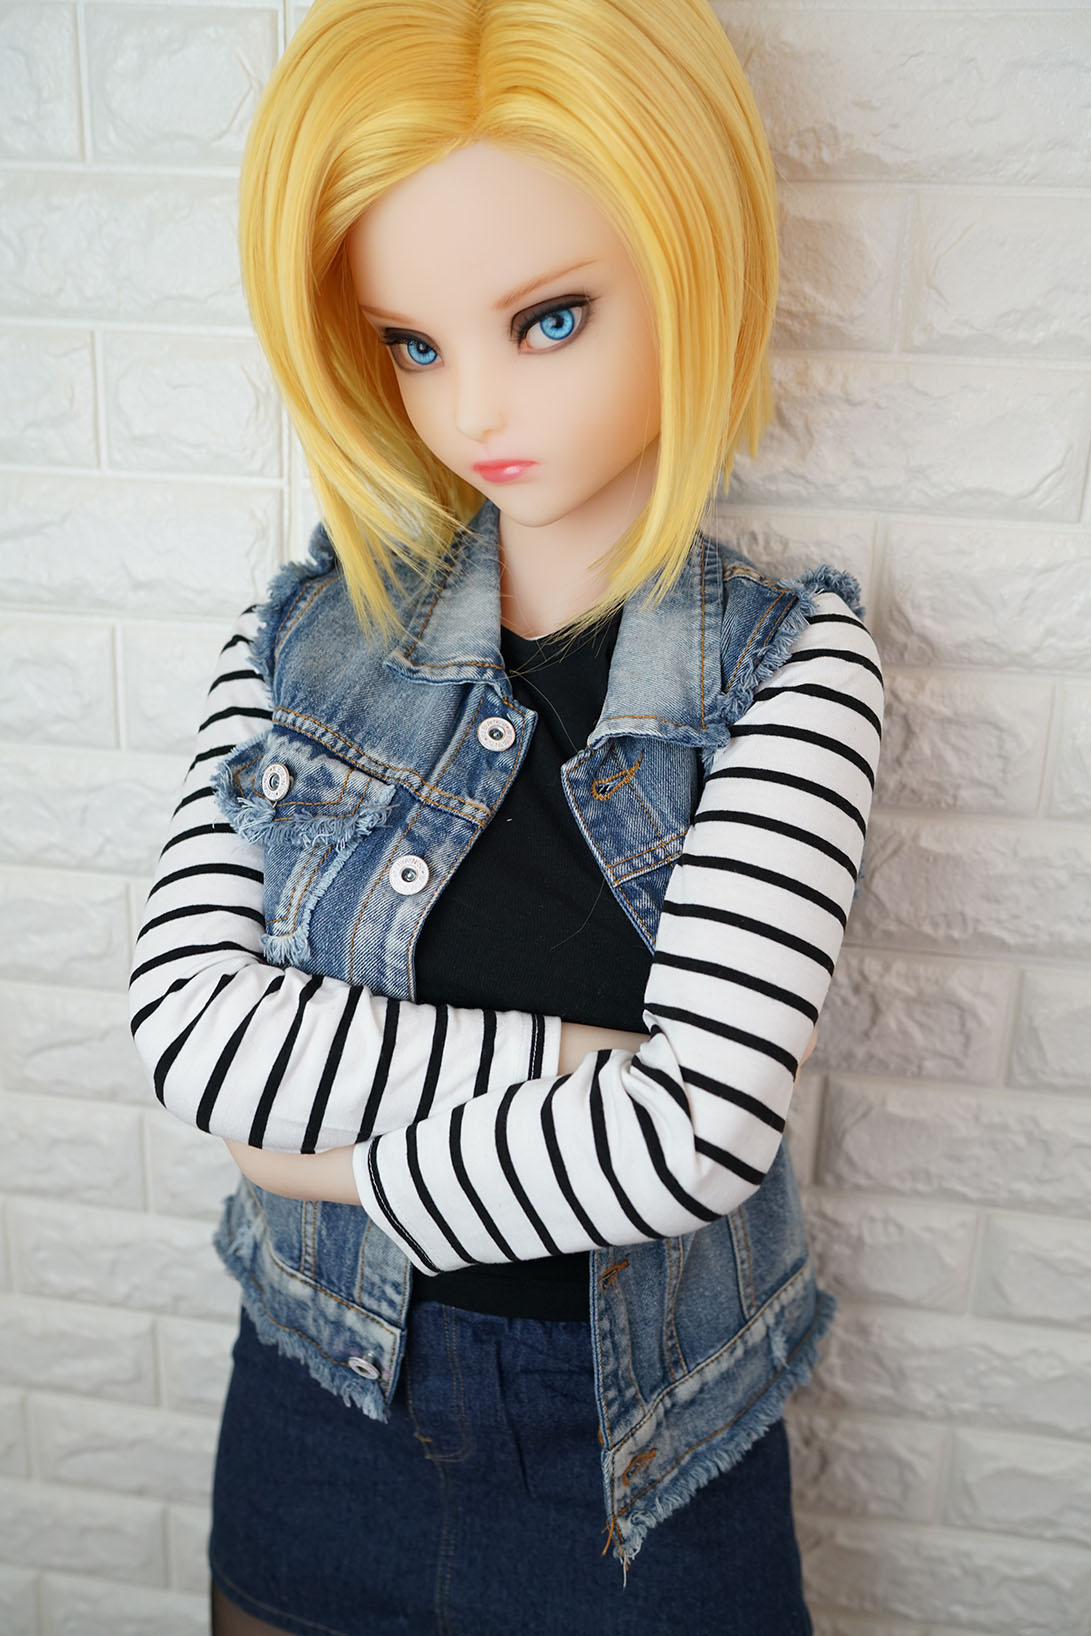 4ft7/145cm F Cup TPE Android 18 Sex Doll - Lazuli -Lilysuck